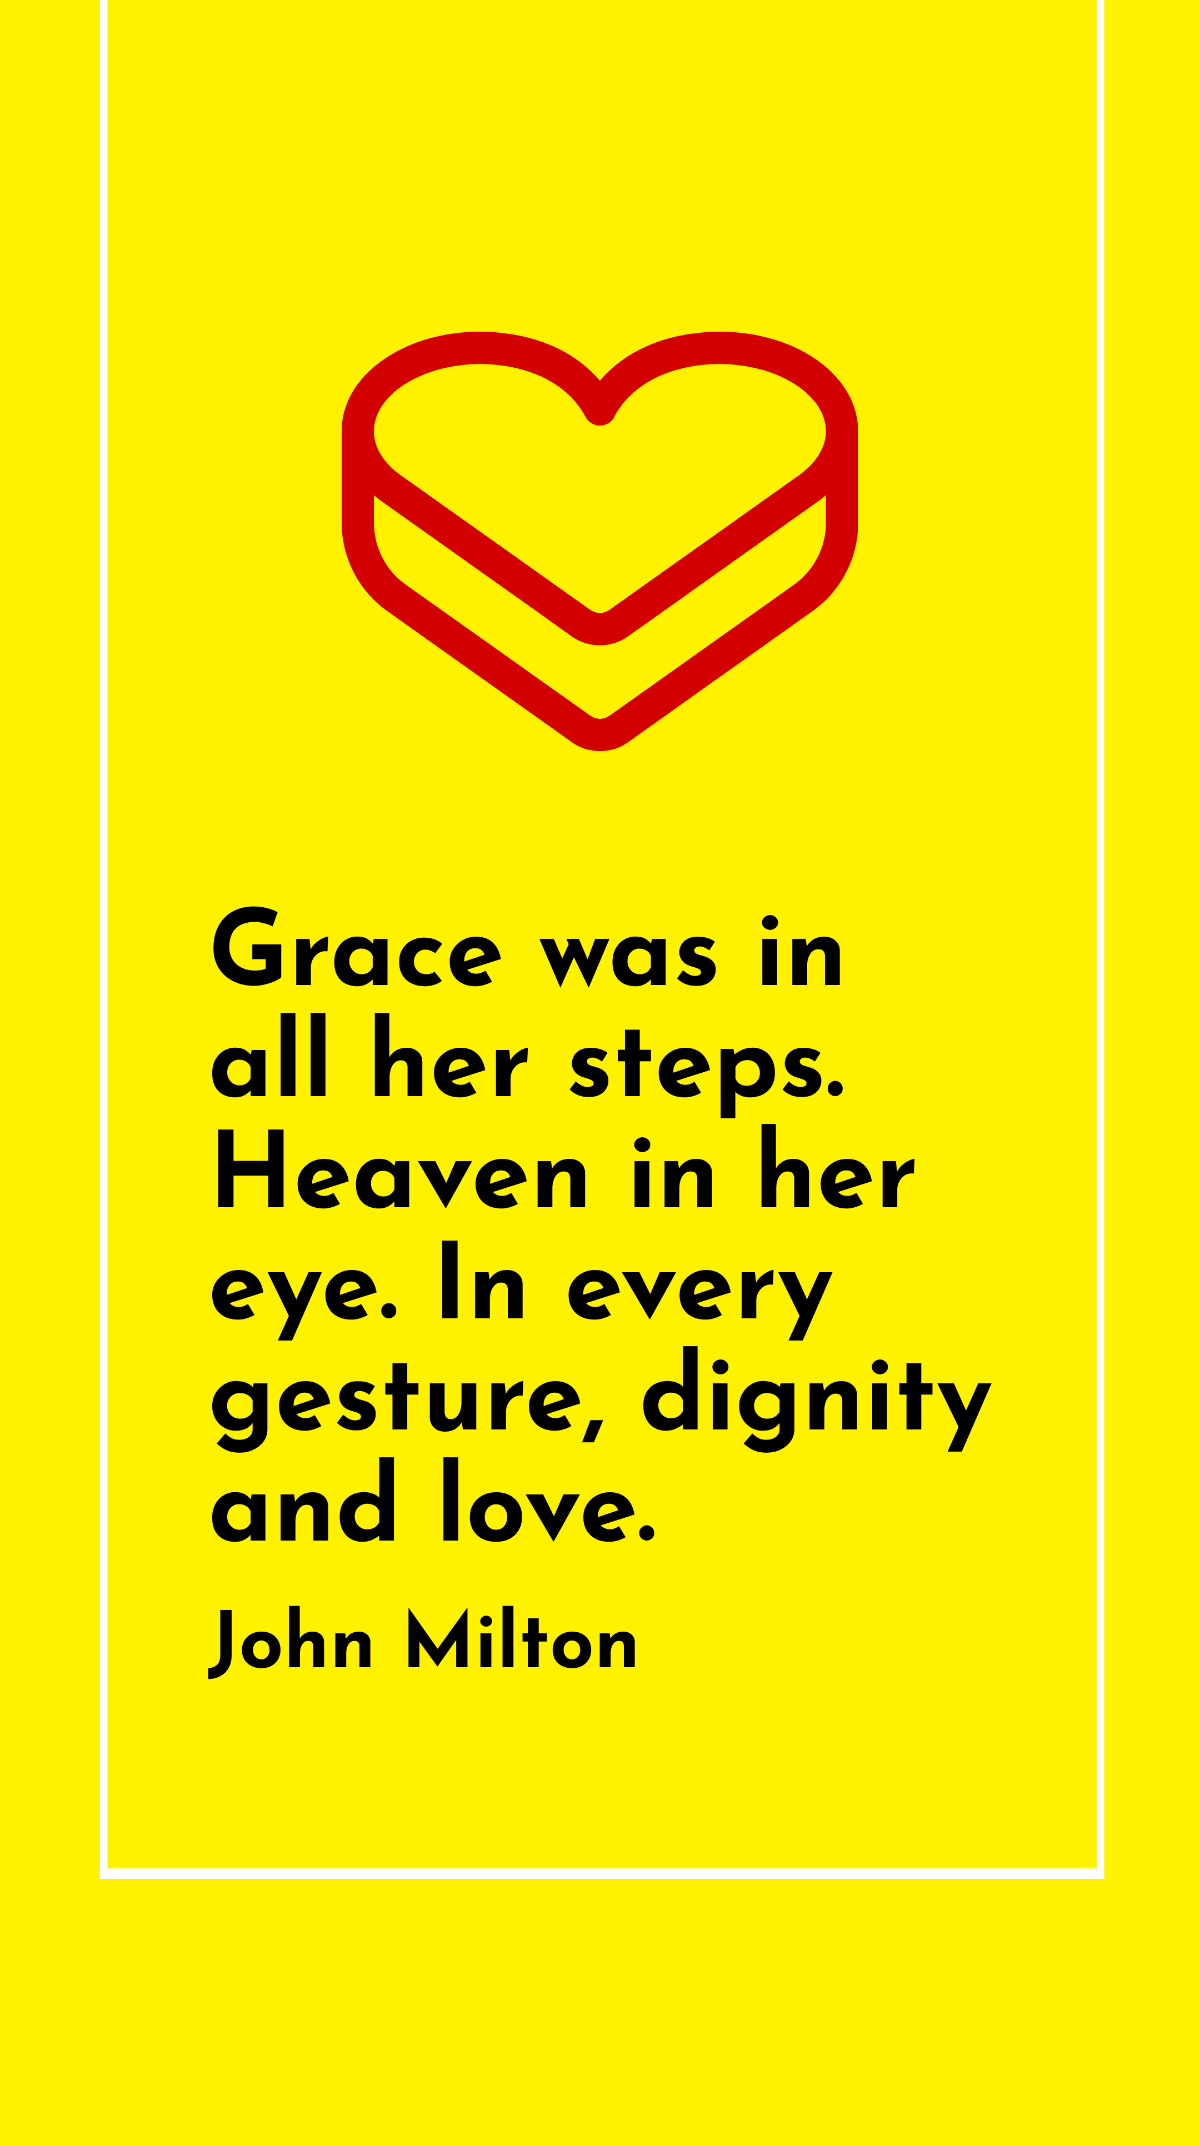 John Milton - Grace was in all her steps. Heaven in her eye. In every gesture, dignity and love. Template